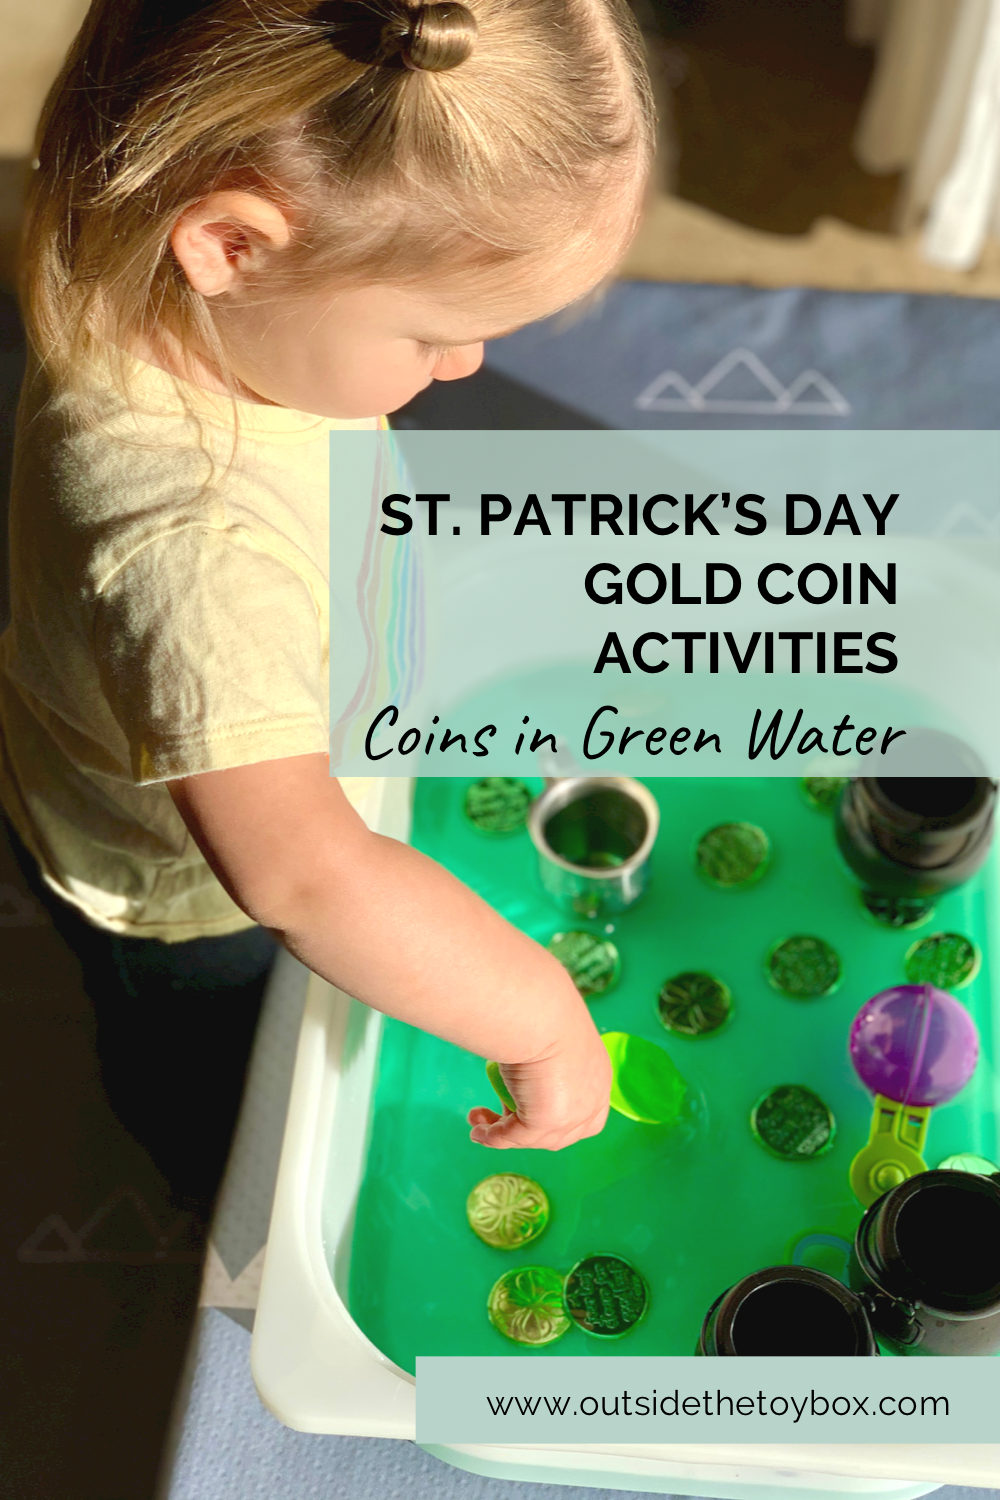 Toddler playing with gold coins in green water